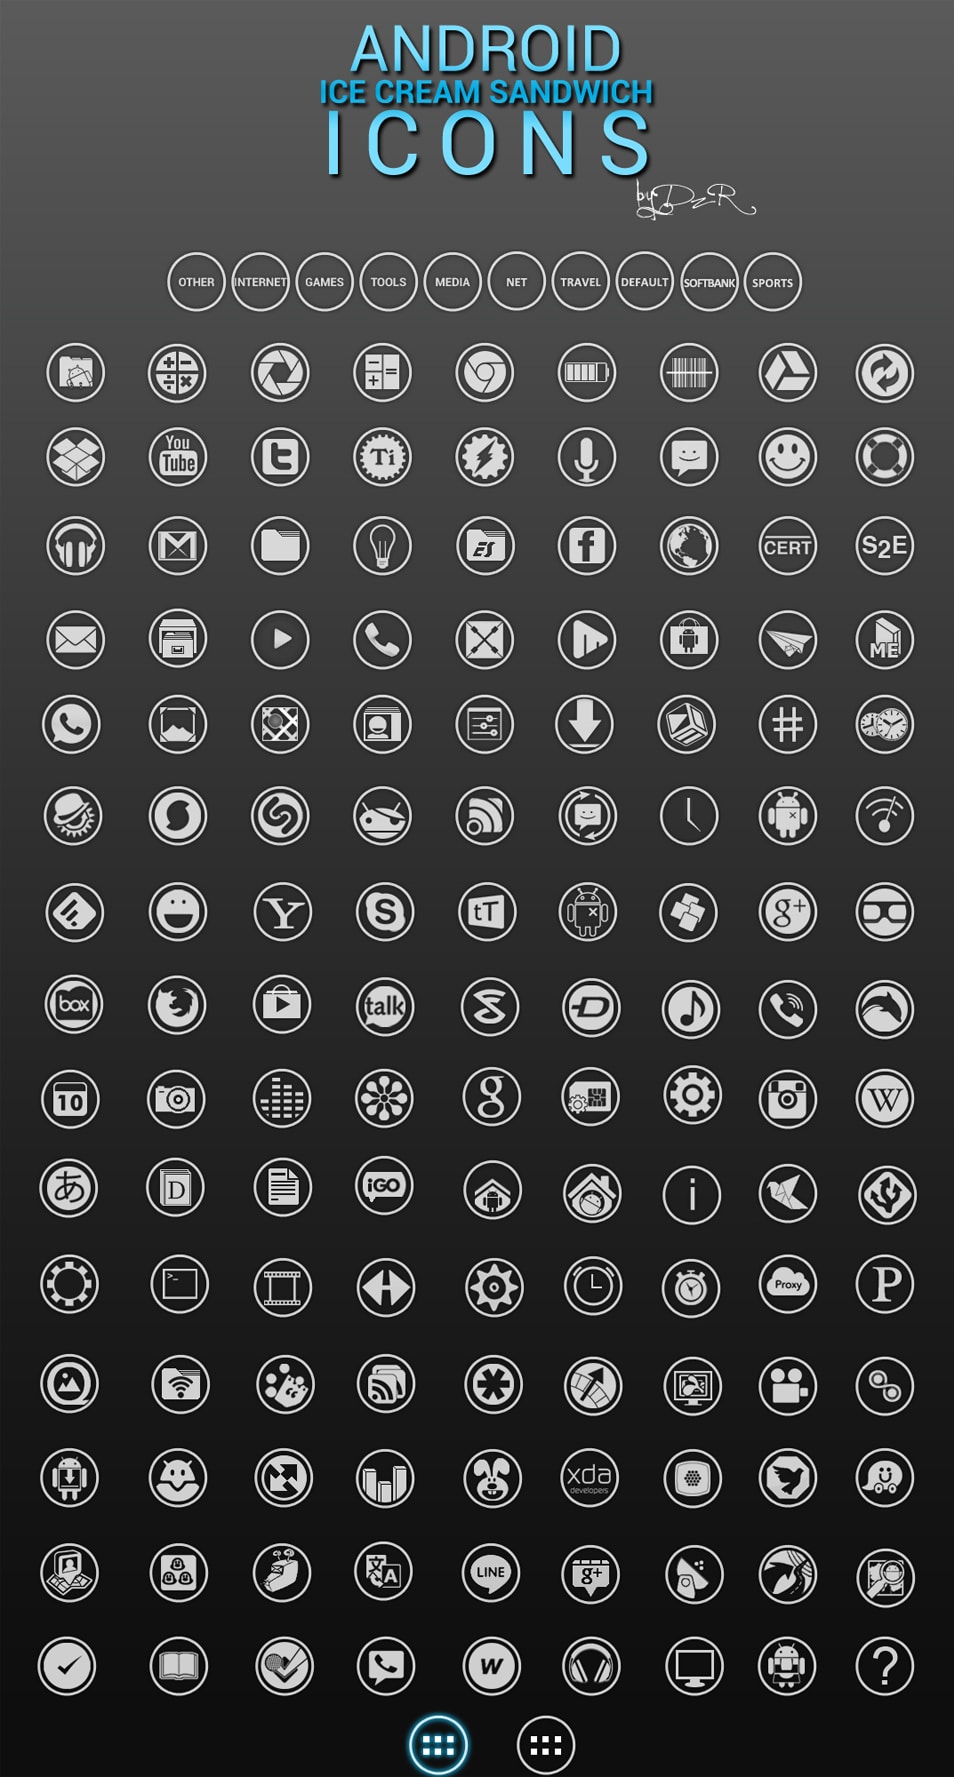 Download 20 Beautiful Icon Sets For Android